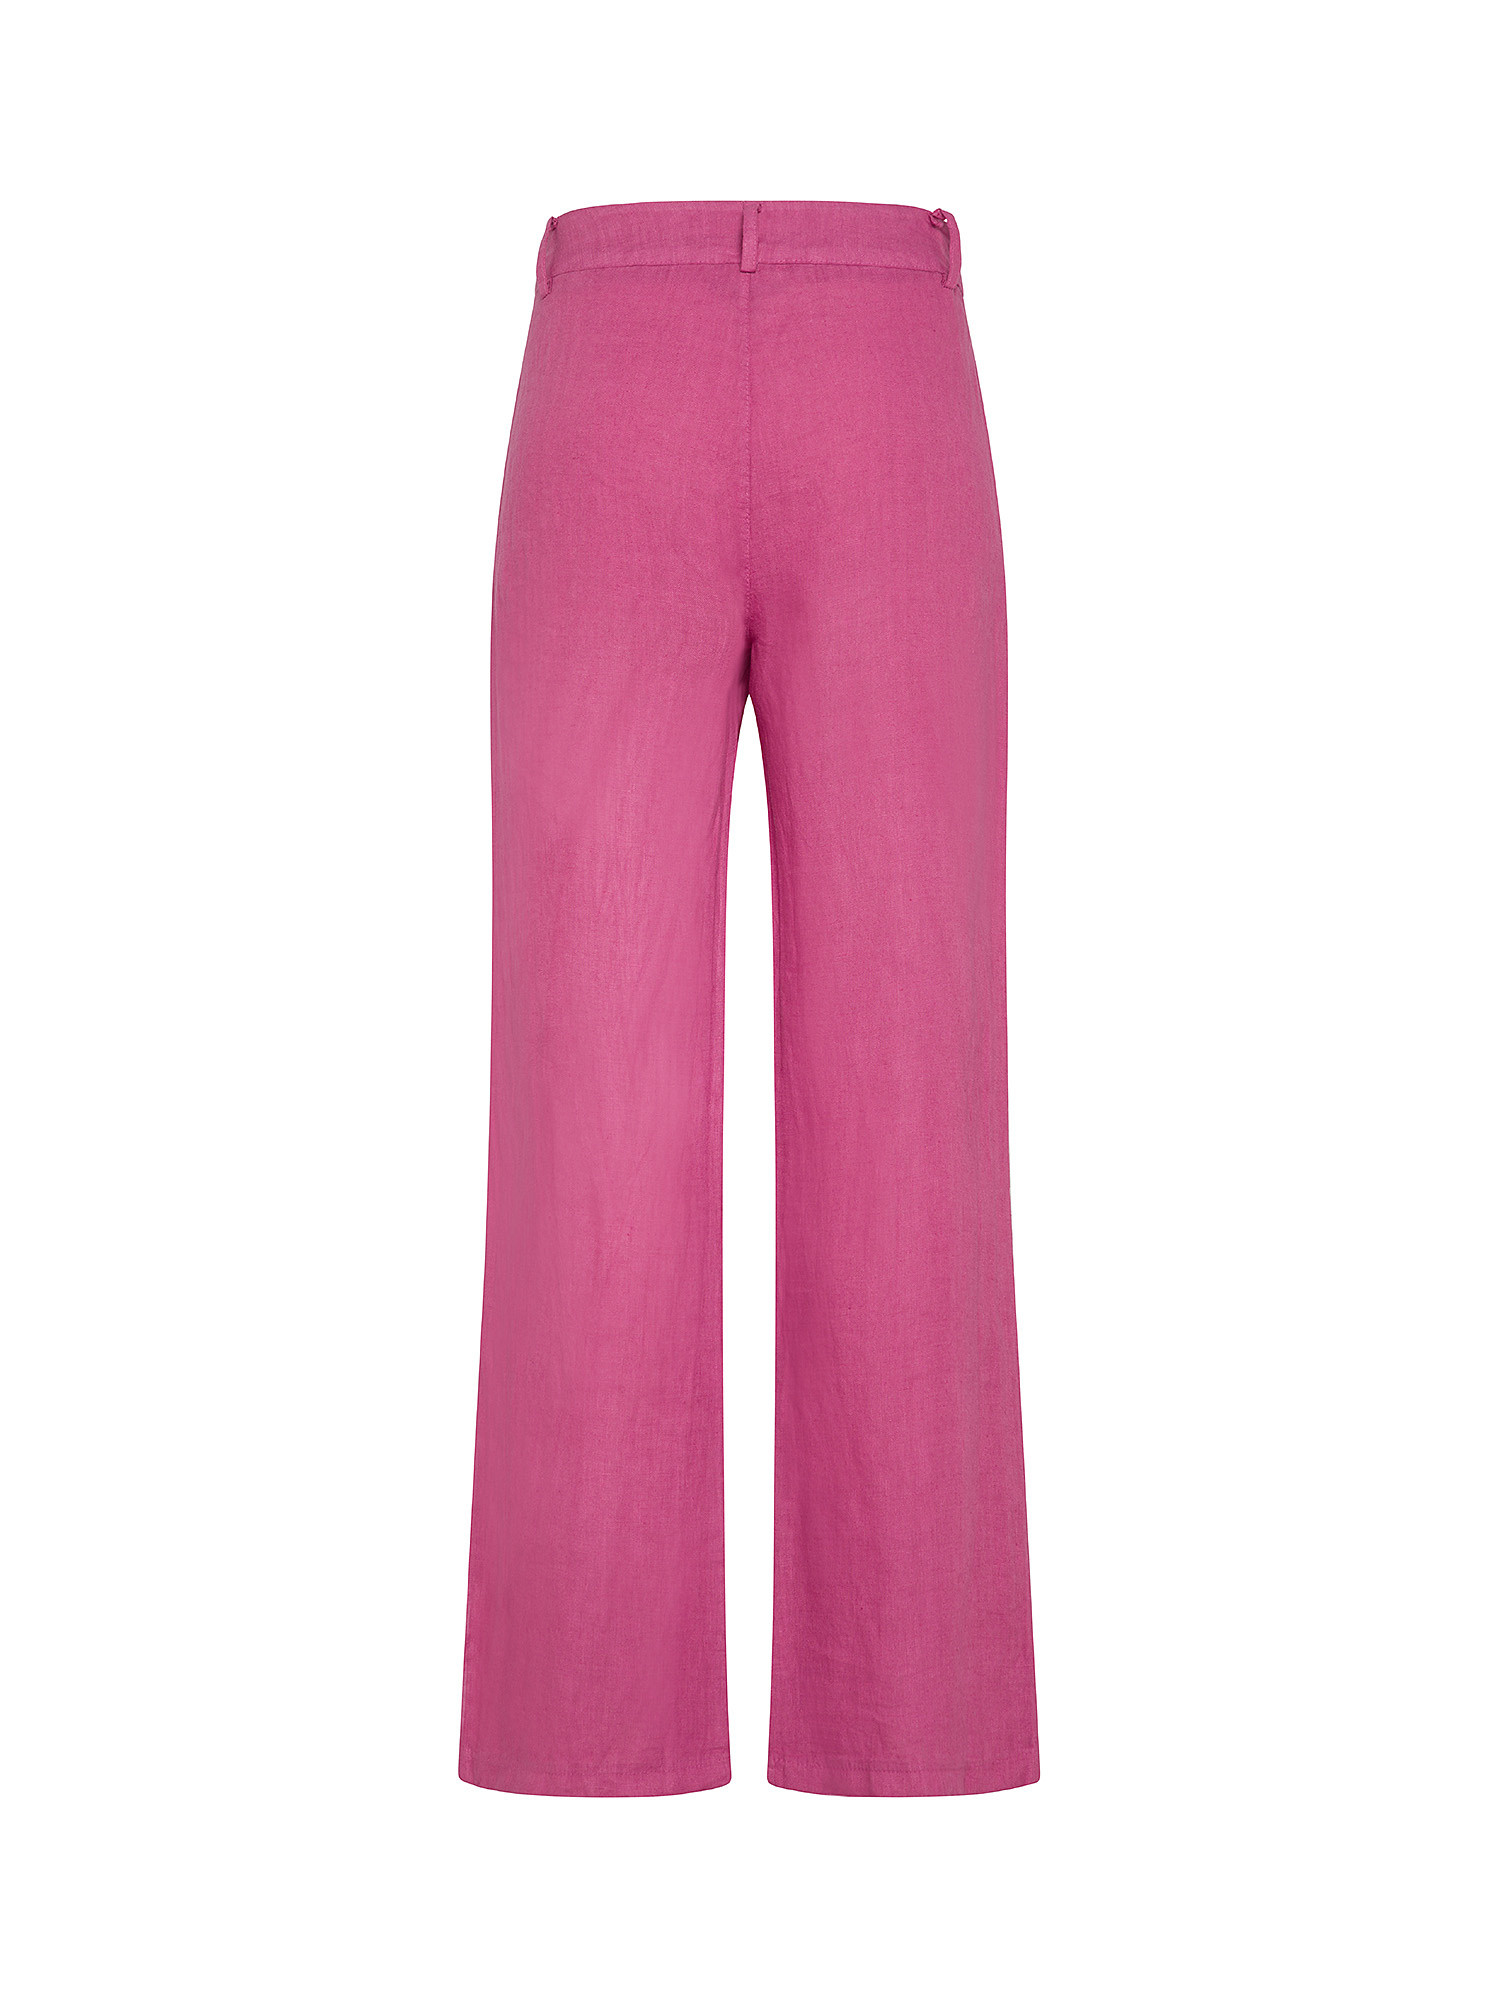 Koan - Linen trousers with pleats, Pink, large image number 1